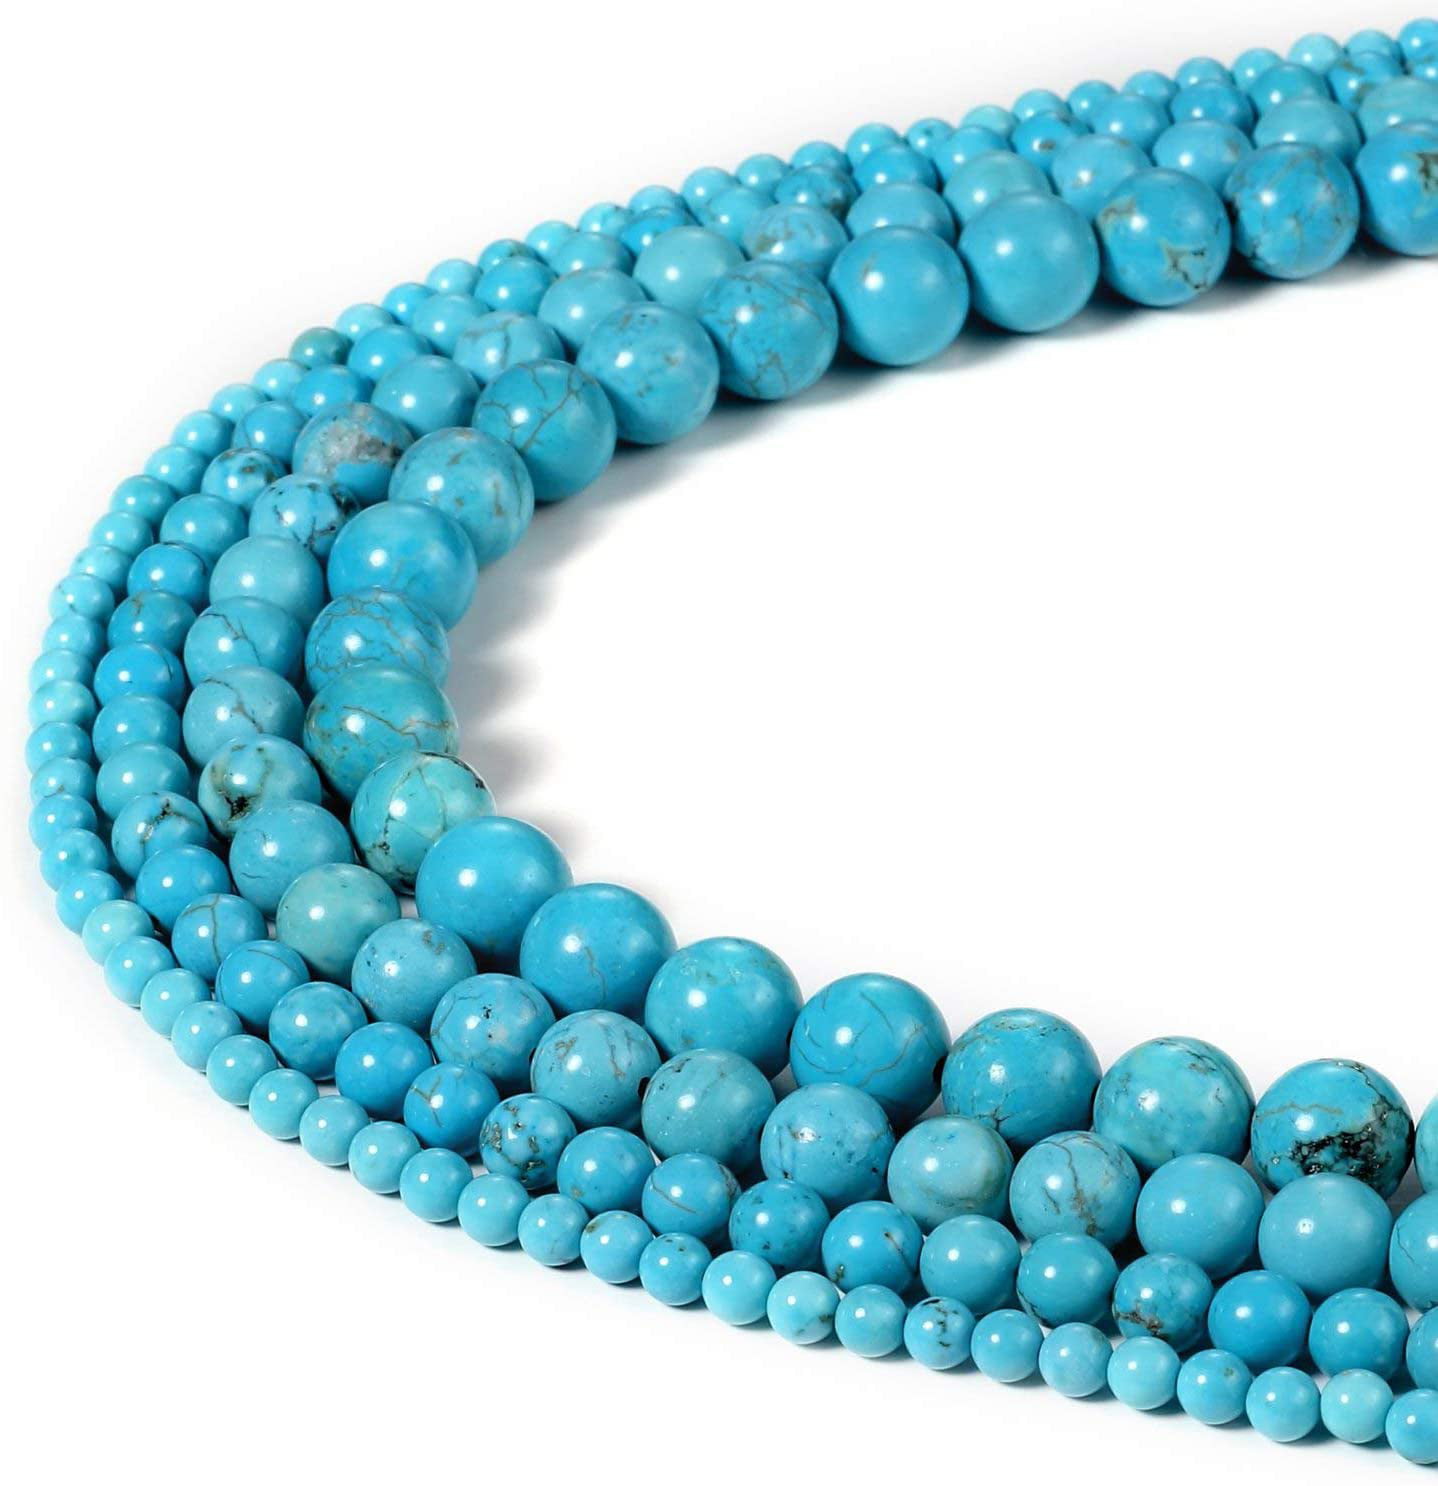 Blue Turquoise Gemstone Round Loose Spacer Beads For Jewelry Making 15" 